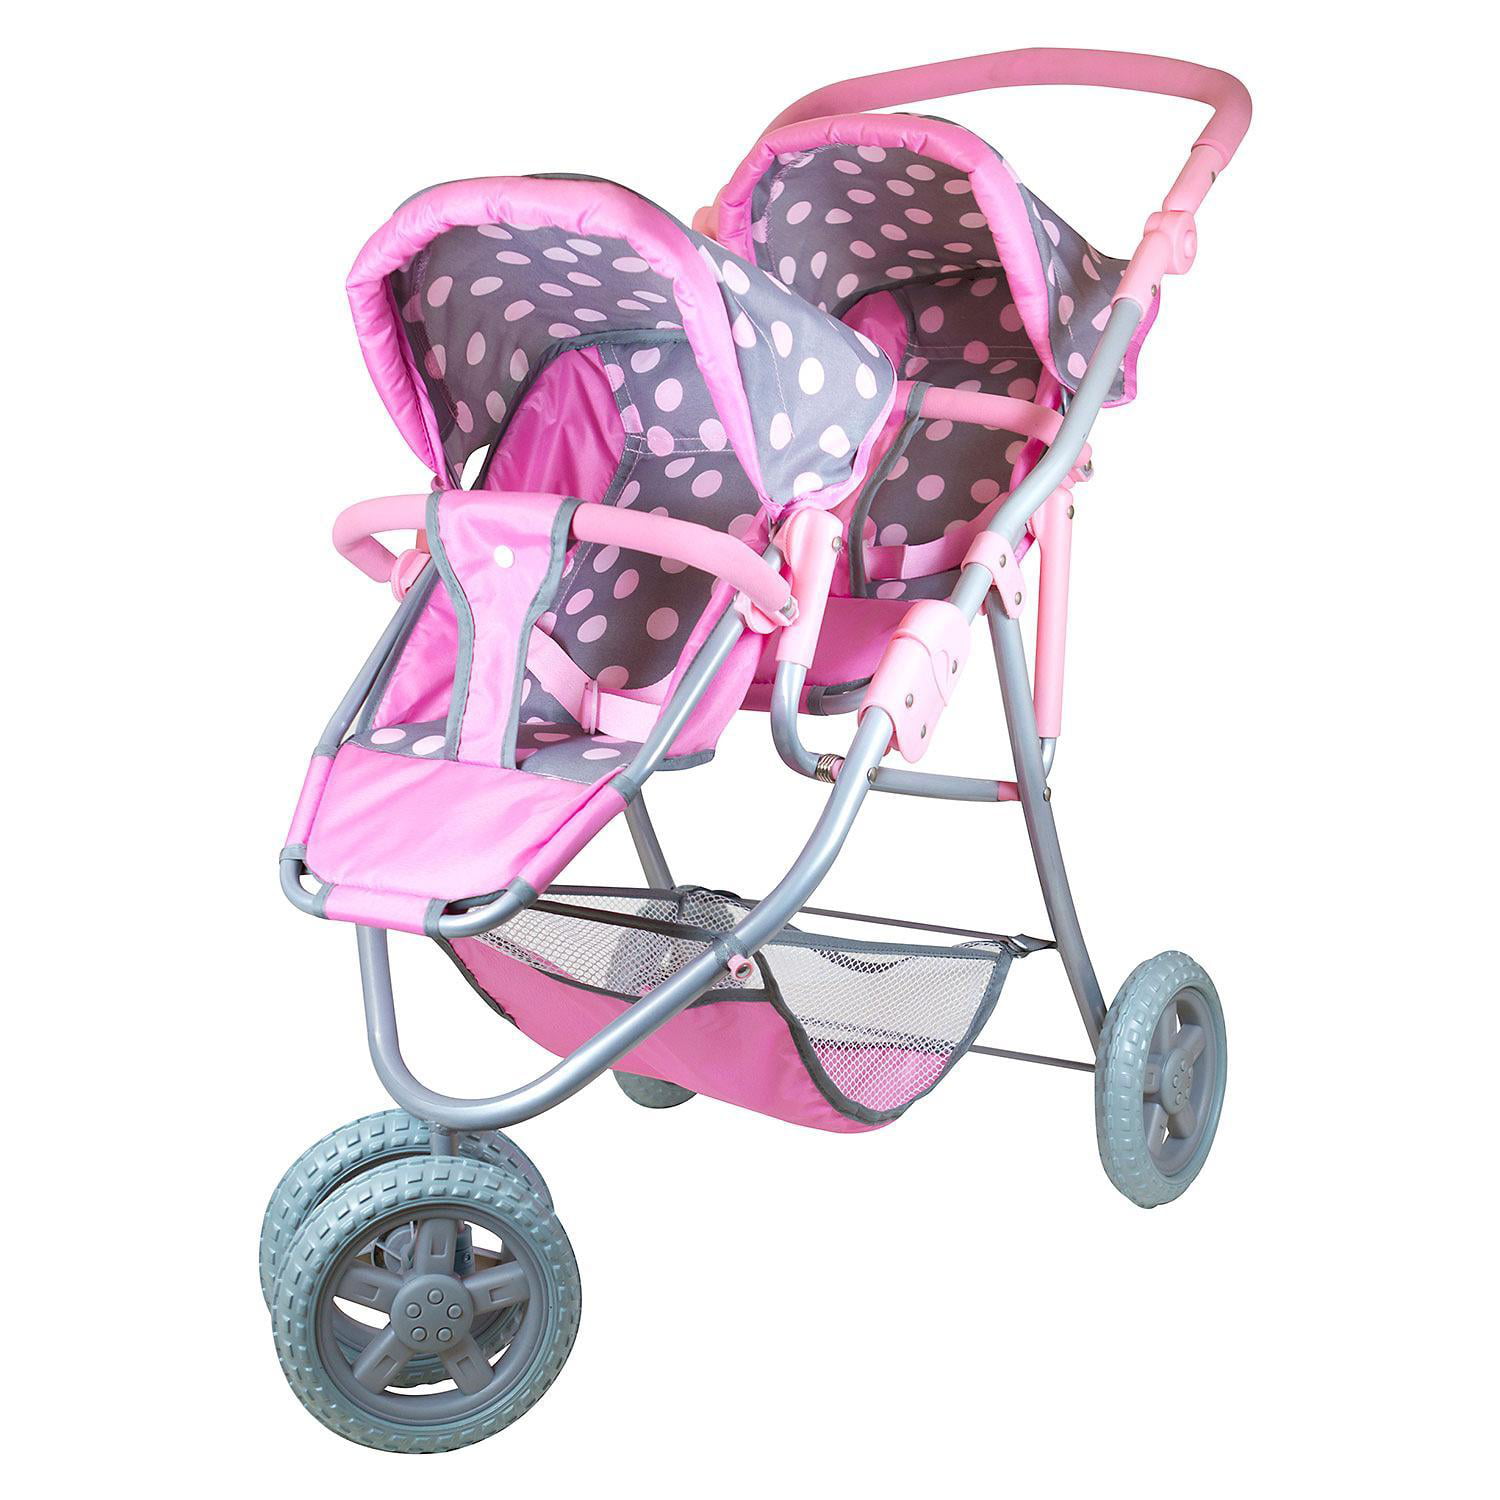 Details about   Exquisite Buggy Twin Doll Double Stroller Pink & Polka with 2Free Magic Bottles 